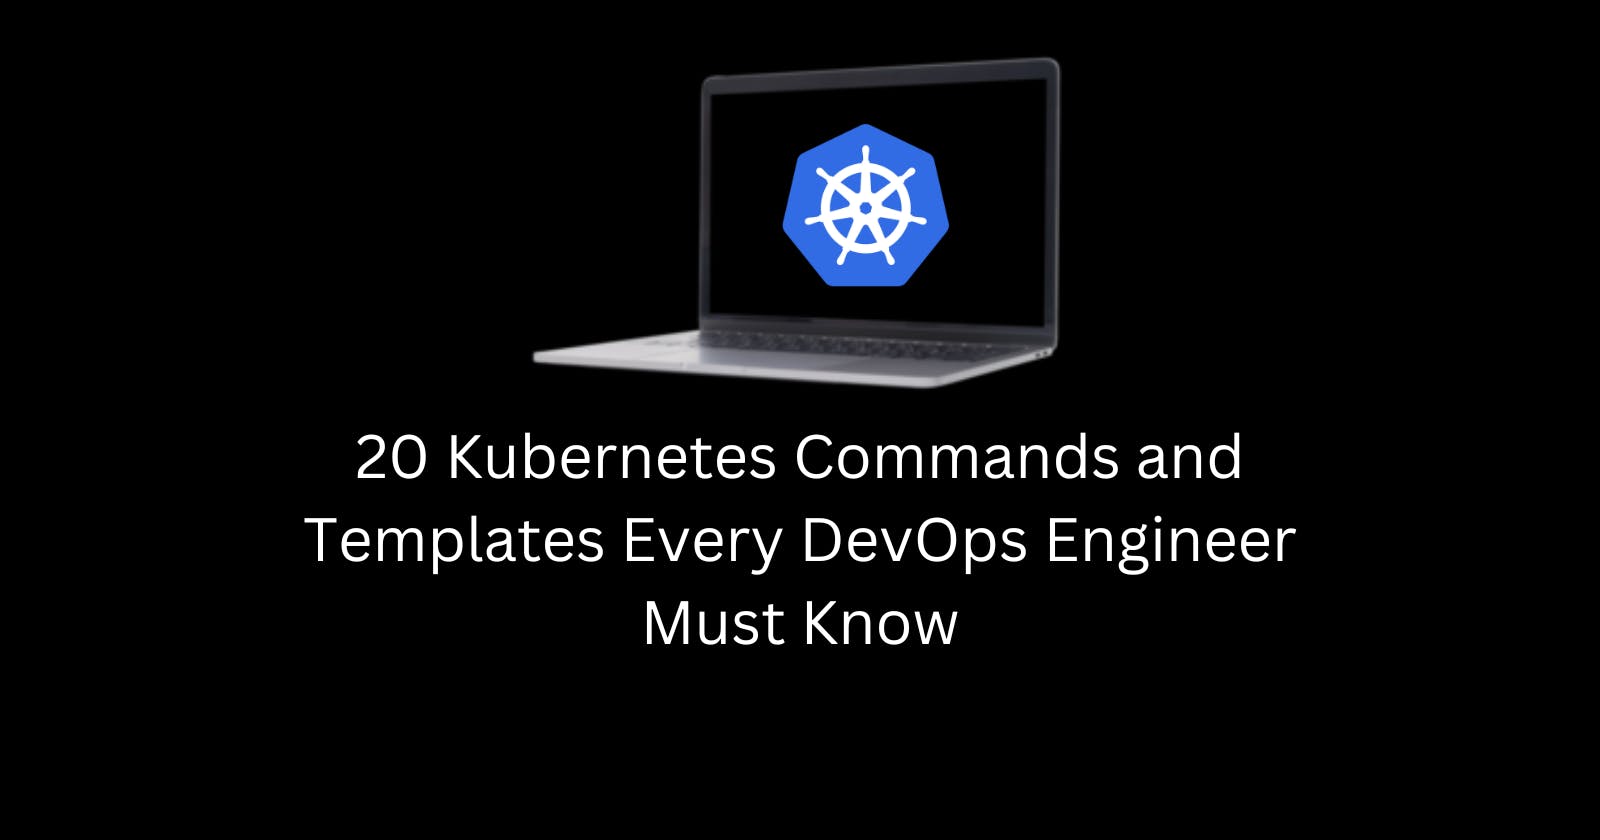 20 Kubernetes Commands and Templates Every DevOps Engineer Must Know